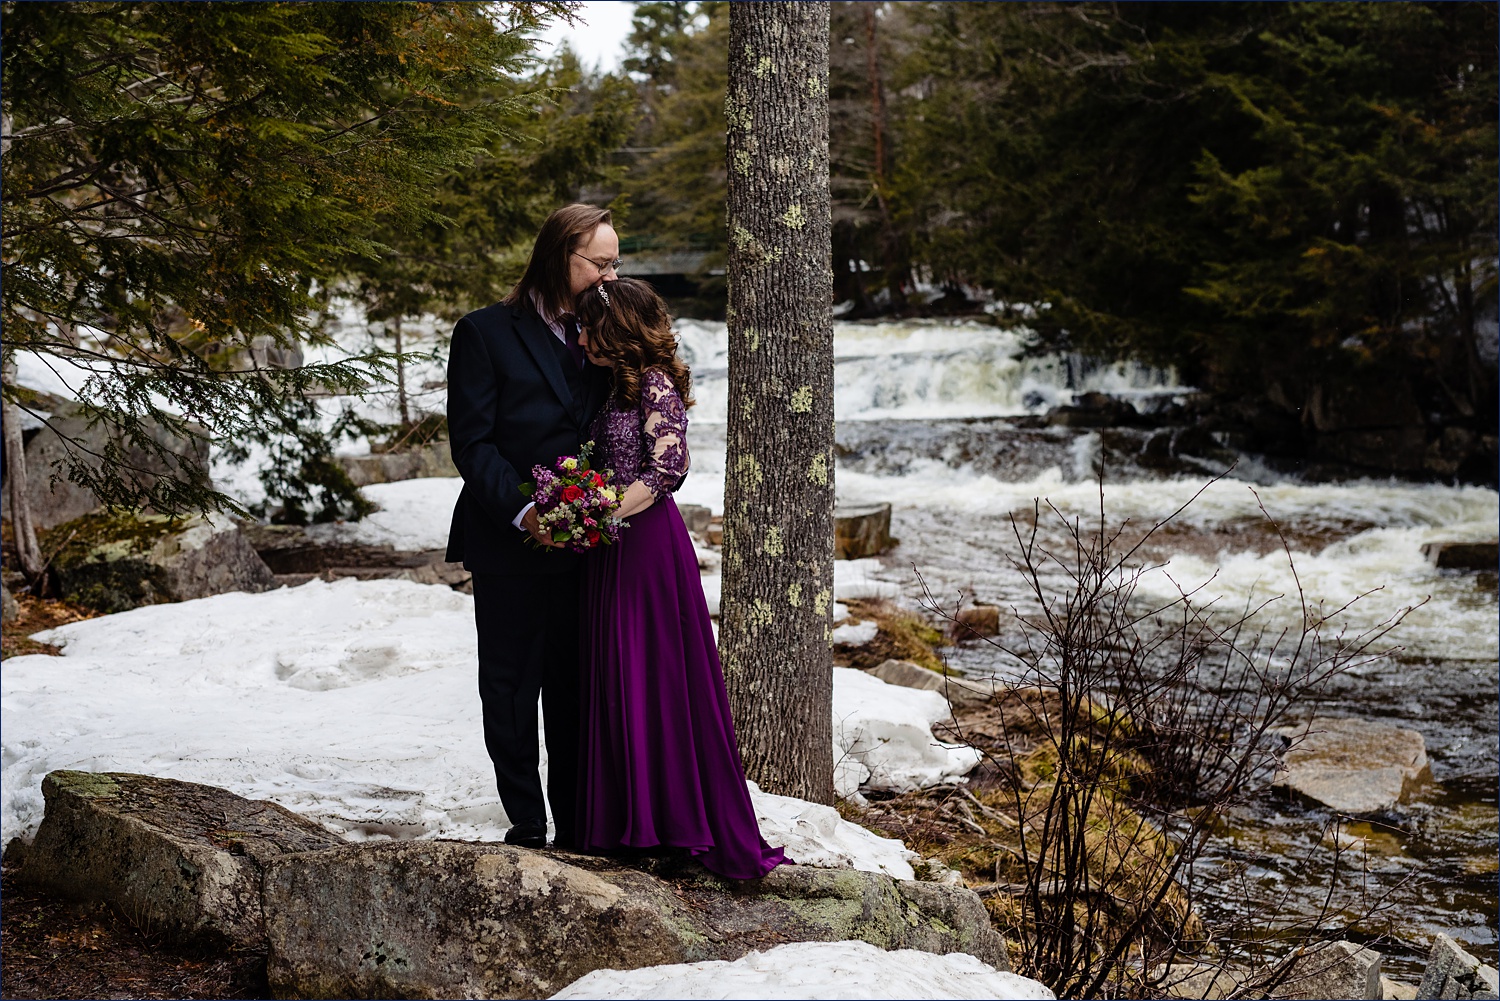 The newlyweds stand by Jackson Falls in the Spring chill air after their NH Elopement